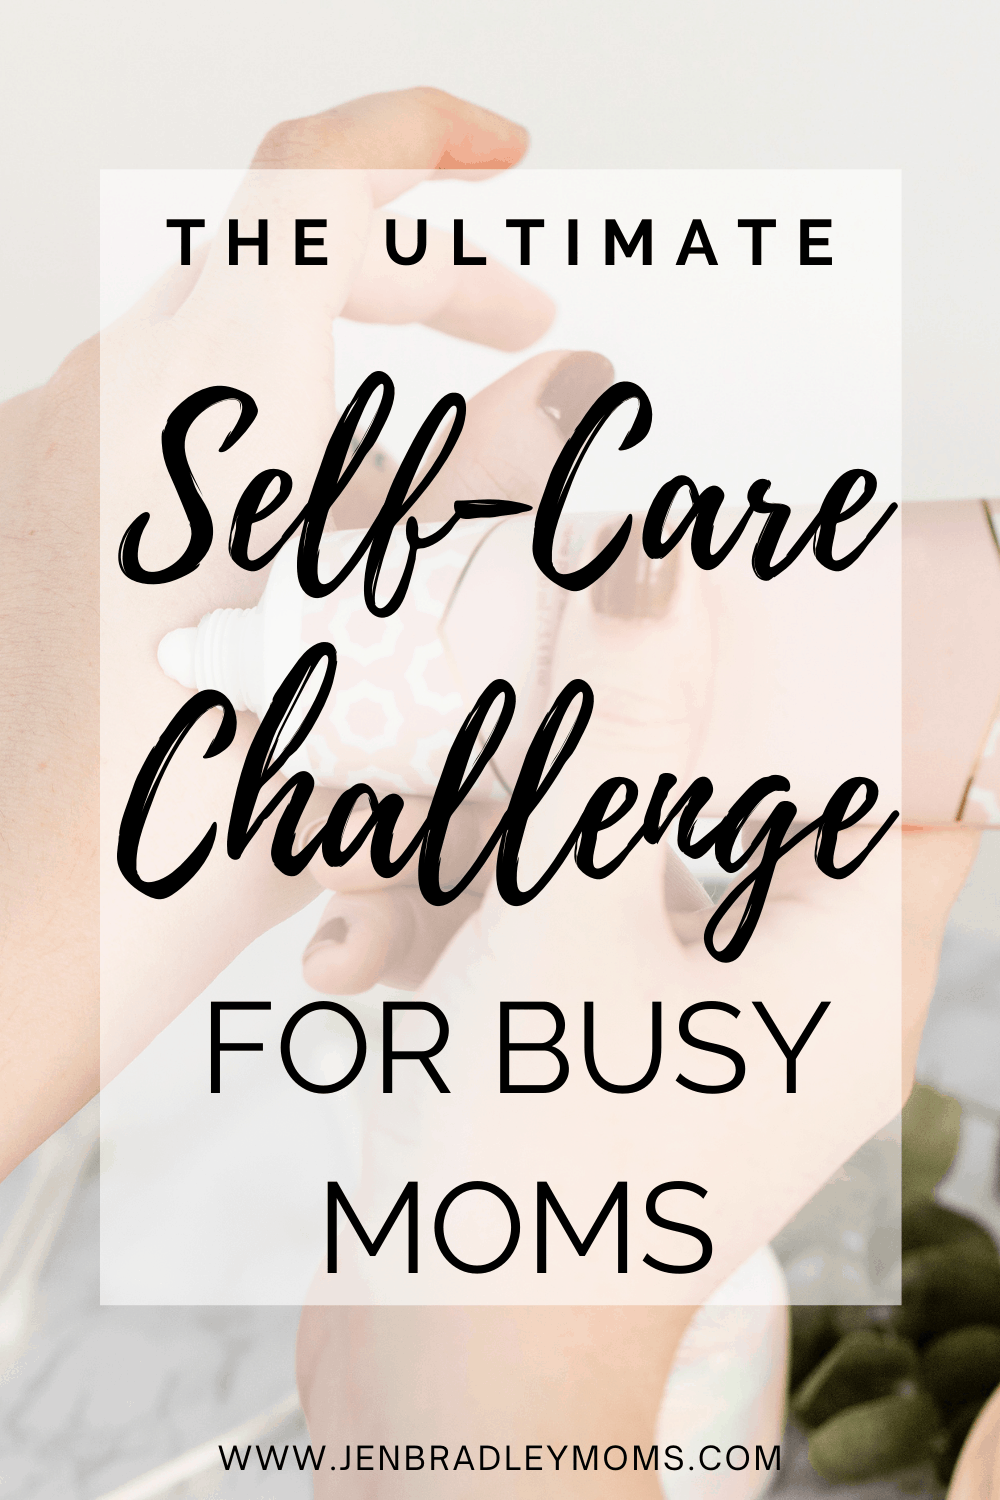 The Ultimate 30-Day Self-Care Challenge for Tired Moms